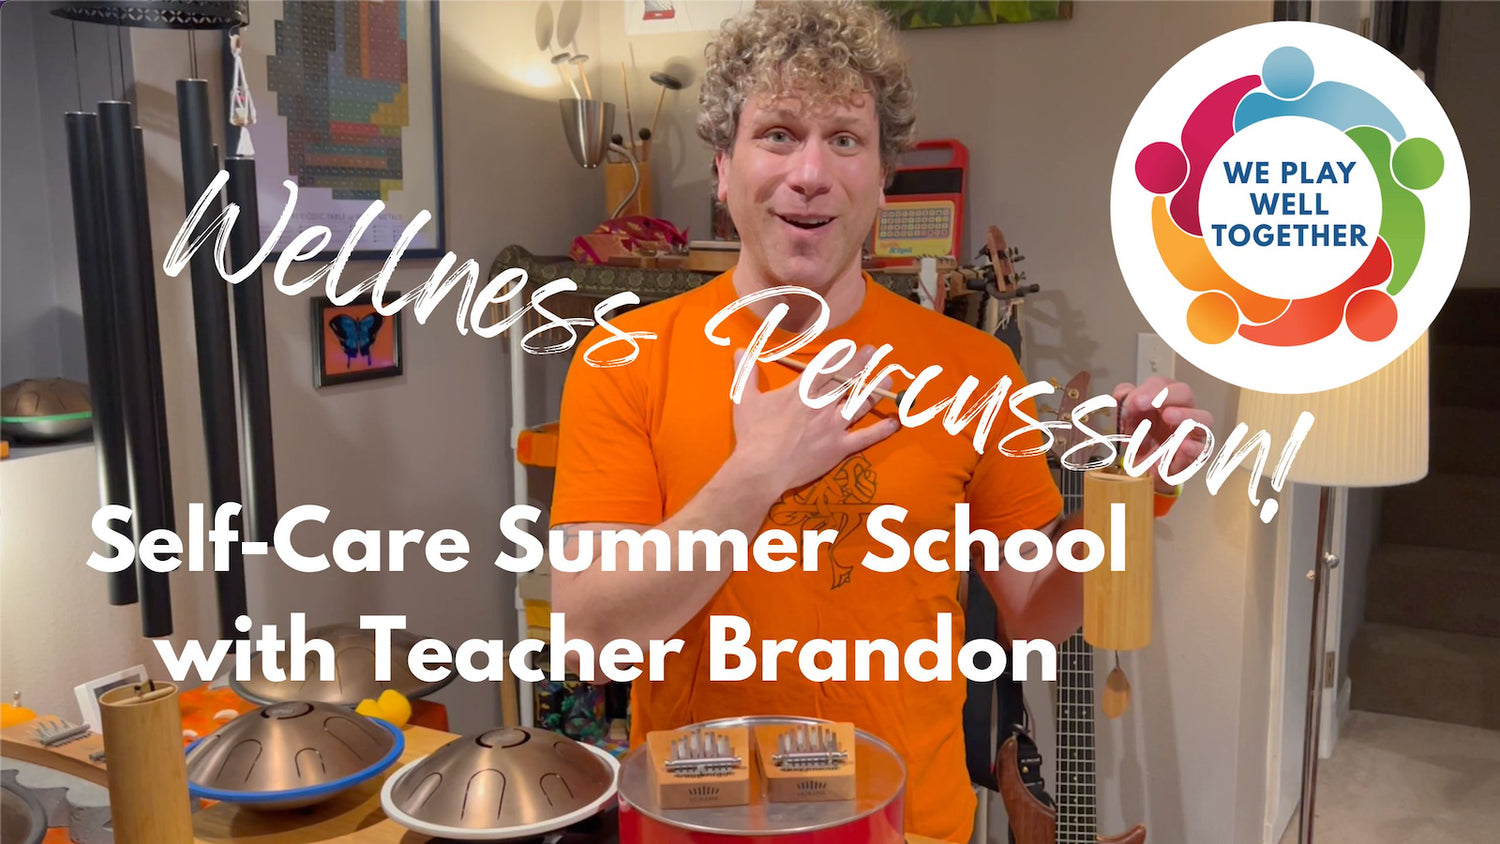 Brandon Blake, a musician and teacher together with Hokema kalimbas, Koshi chimes and Elemental metal tongue drums from Metal Sounds. | weplaywelltogether